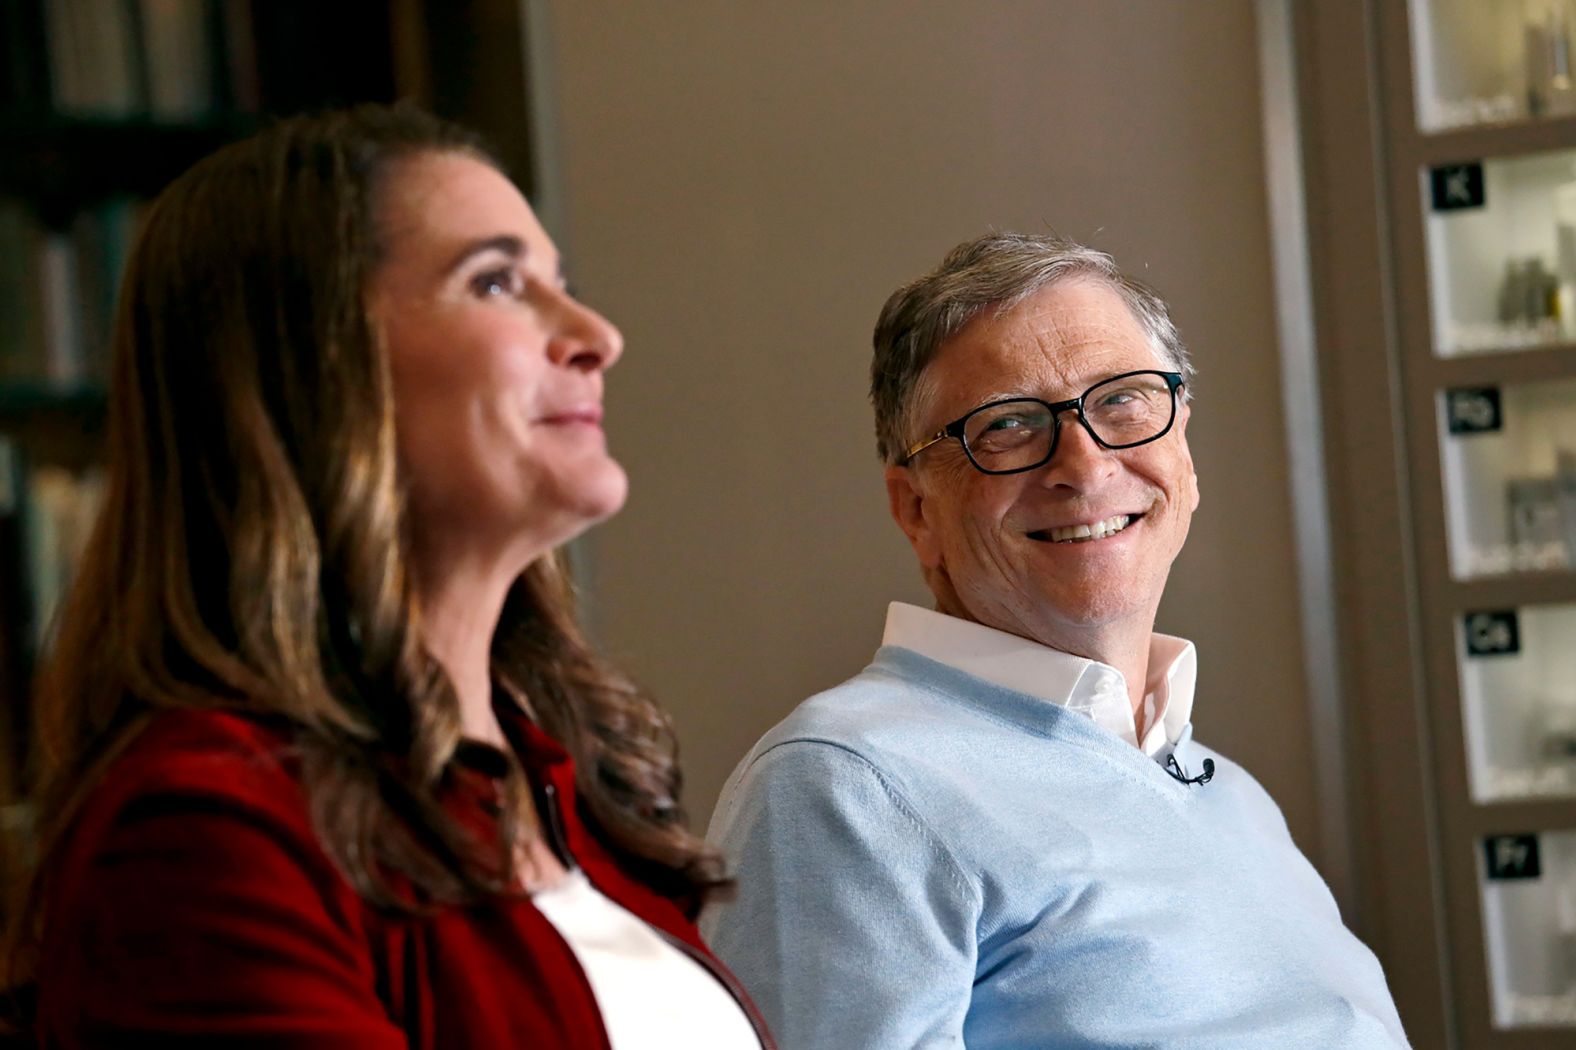 Gates looks at his wife, Melinda, as they are interviewed in Kirkland, Washington, in 2019. <a href="https://www.cnn.com/2021/05/03/tech/bill-and-melinda-gates-divorce/index.html" target="_blank">They divorced in 2021</a> after 27 years of marriage.